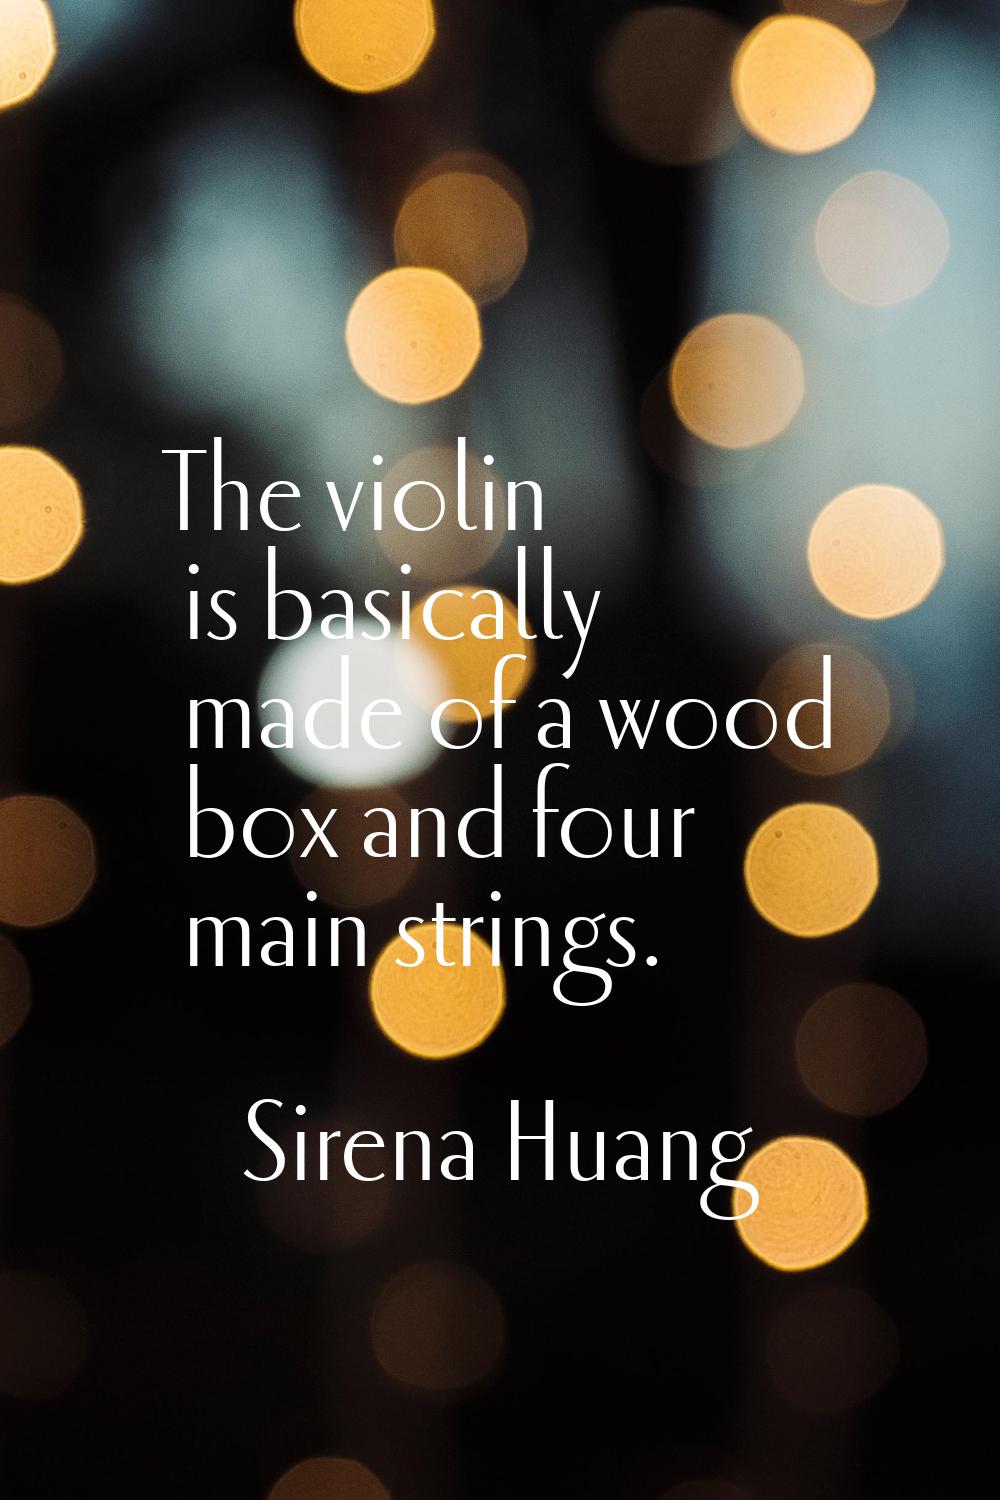 The violin is basically made of a wood box and four main strings.